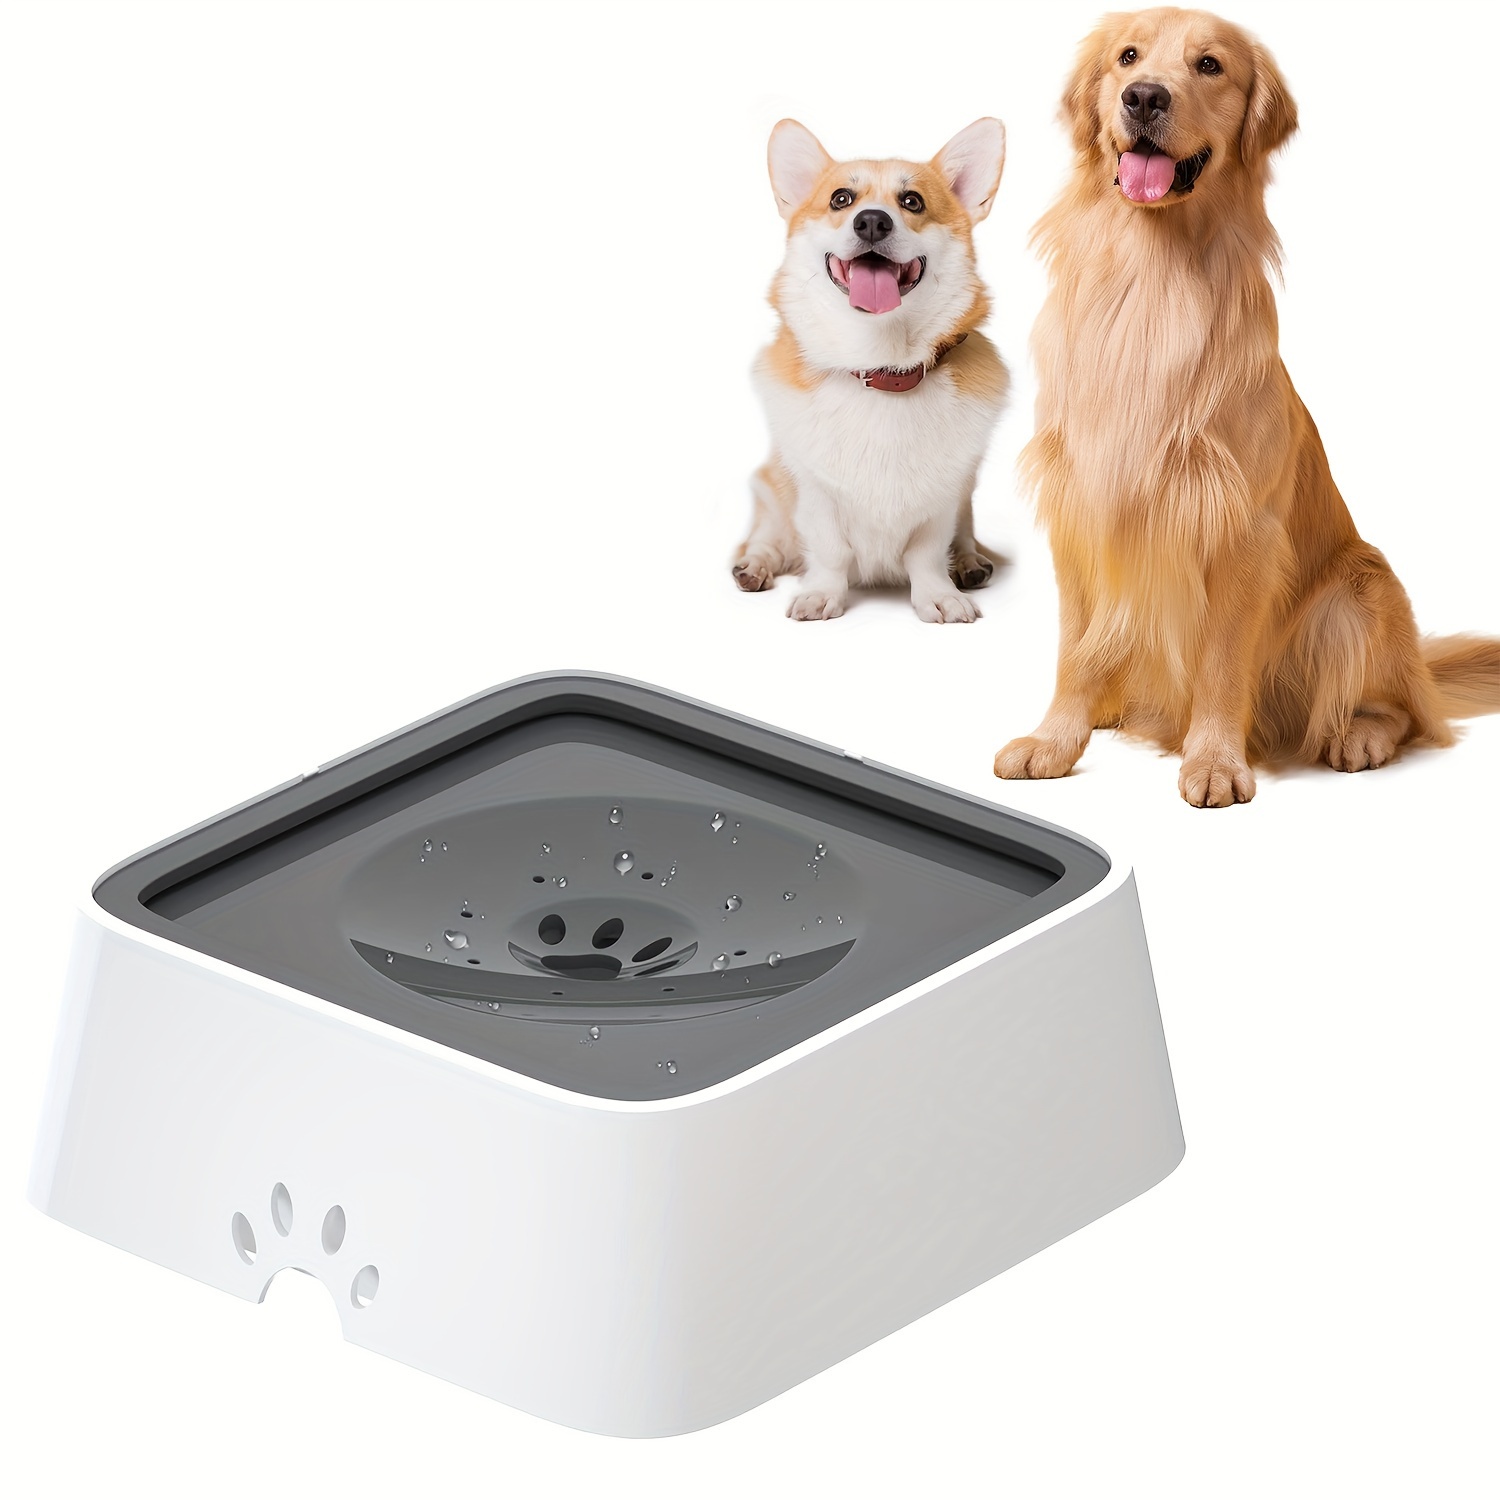 

Pet Dog Bowl No Spill, Pet Water Bowl No Drip Slow Water Dispenser Cat Bowl, Pet Water Dispenser 1l Large Capacity Travel Water Bowl For Dogs And Cats (gray)